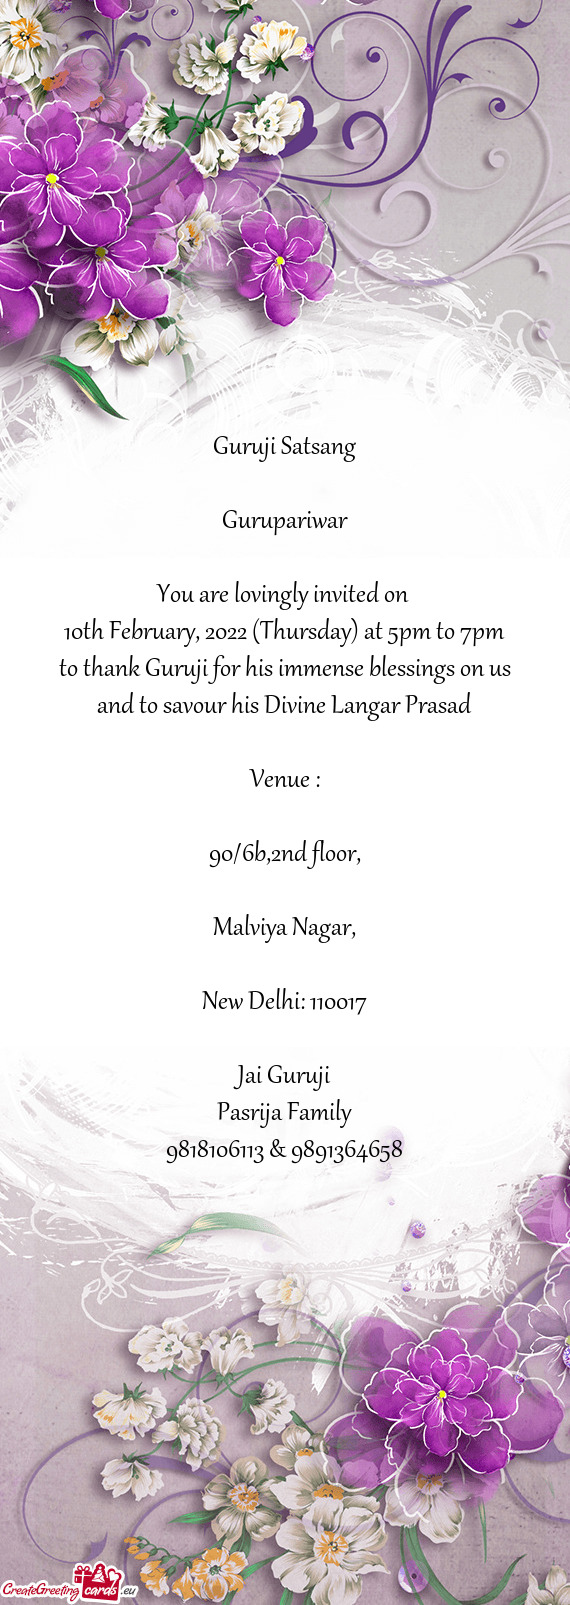 10th February, 2022 (Thursday) at 5pm to 7pm